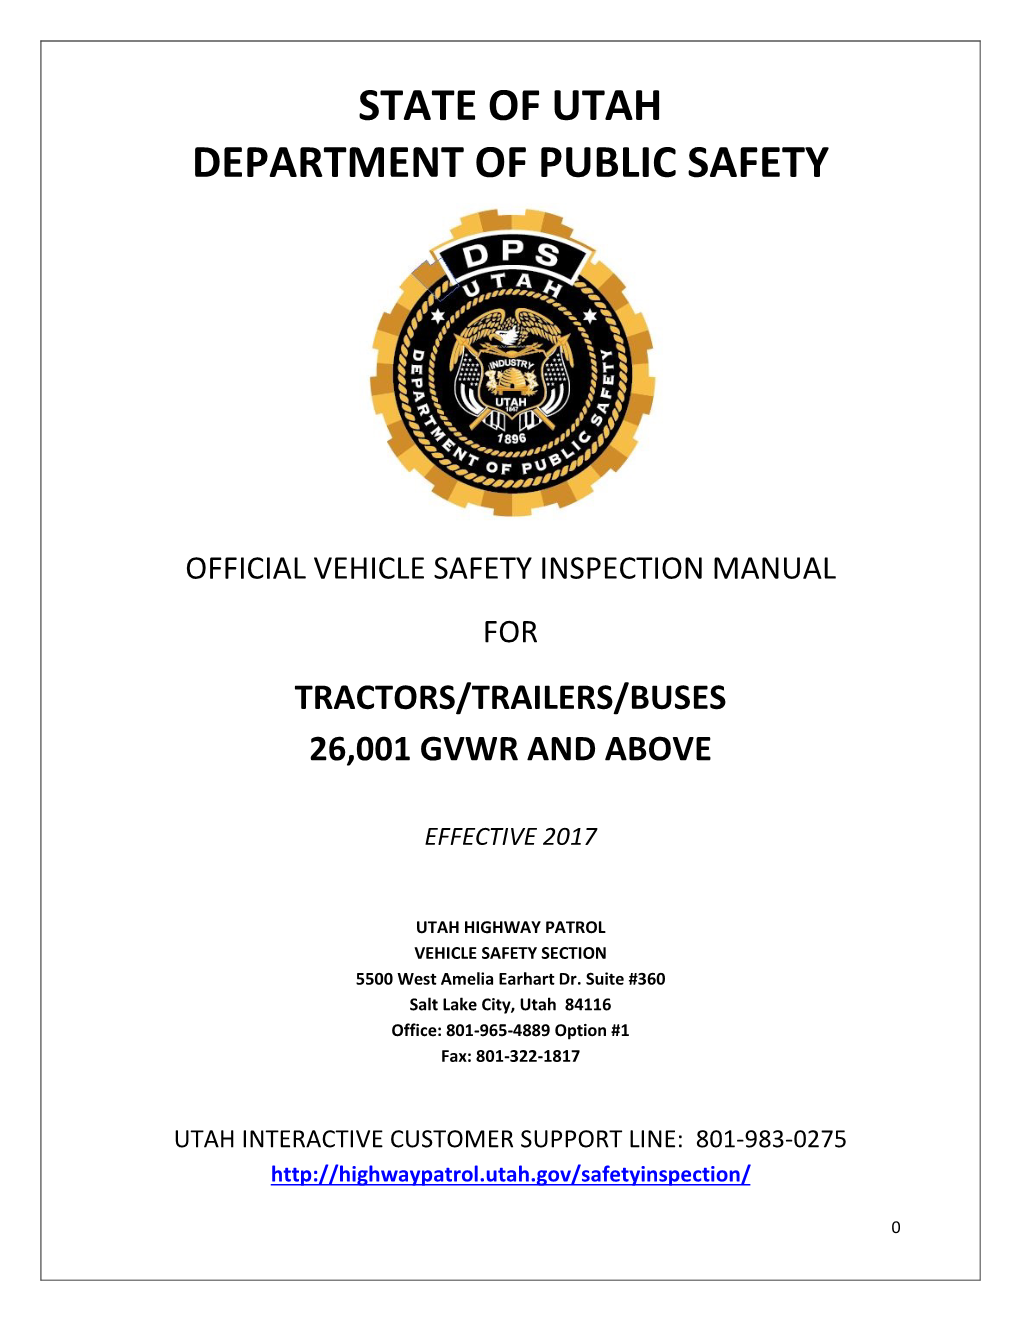 State of Utah Department of Public Safety